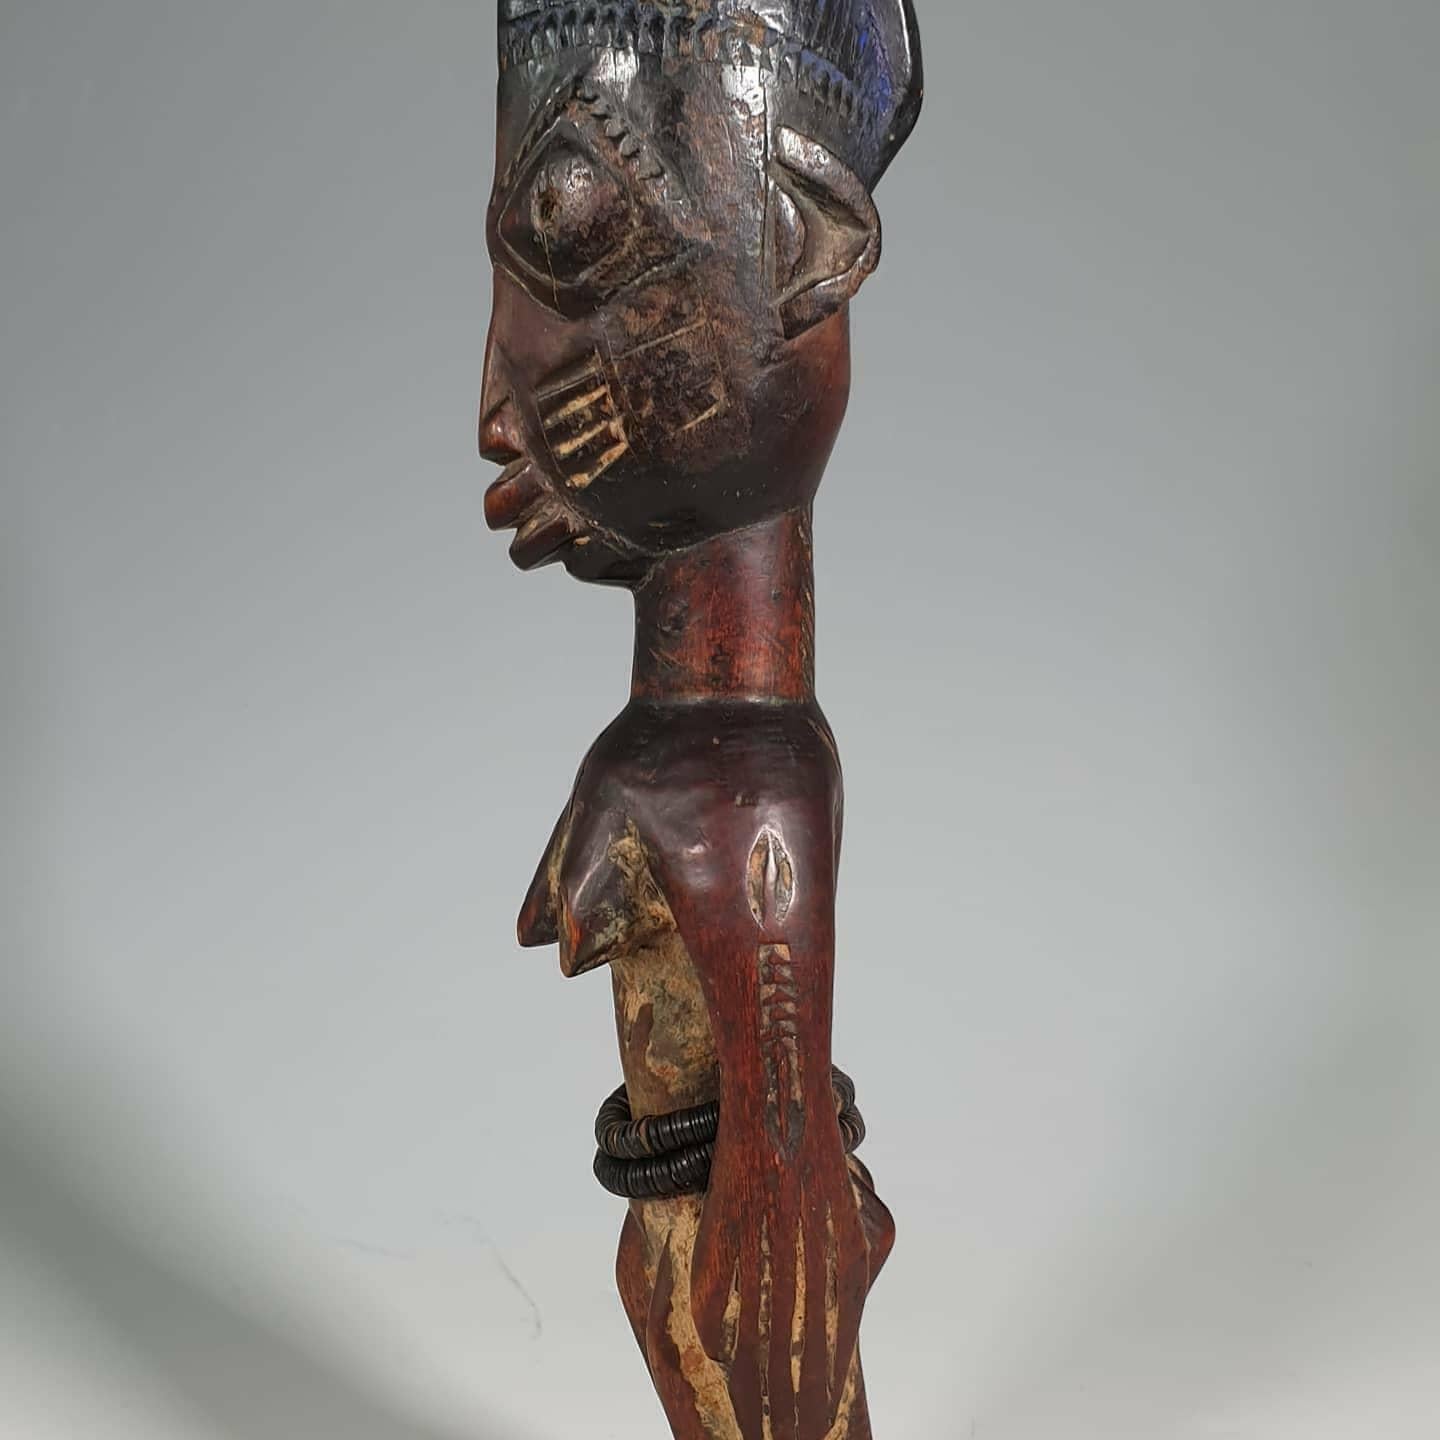 A fine example of a very early 20th century Yoruba Ibeji figure from the South West region of Nigeria. The cult of Ibeji (Twin) goes back hundreds of years with the birth of twins bringing great good fortune to the parents and family. The Ibeji